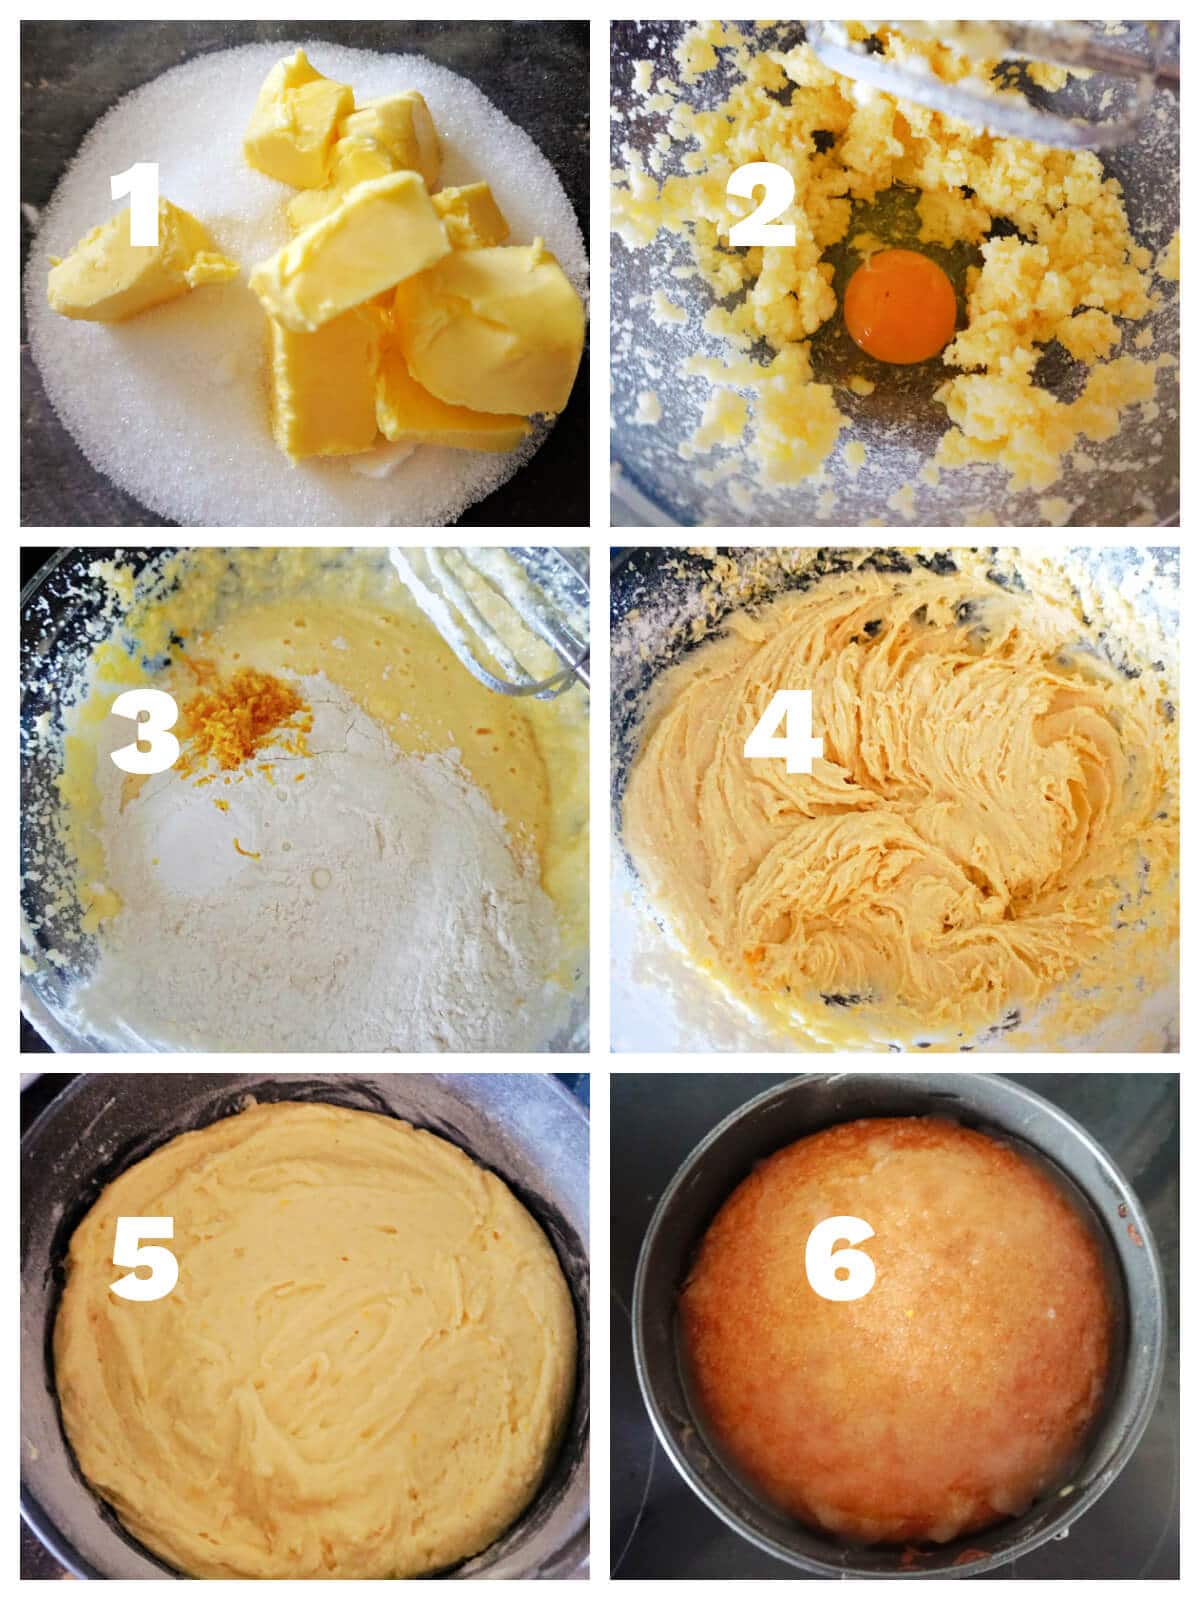 Collage of 6 photos to show how to make lemon drizzle cake